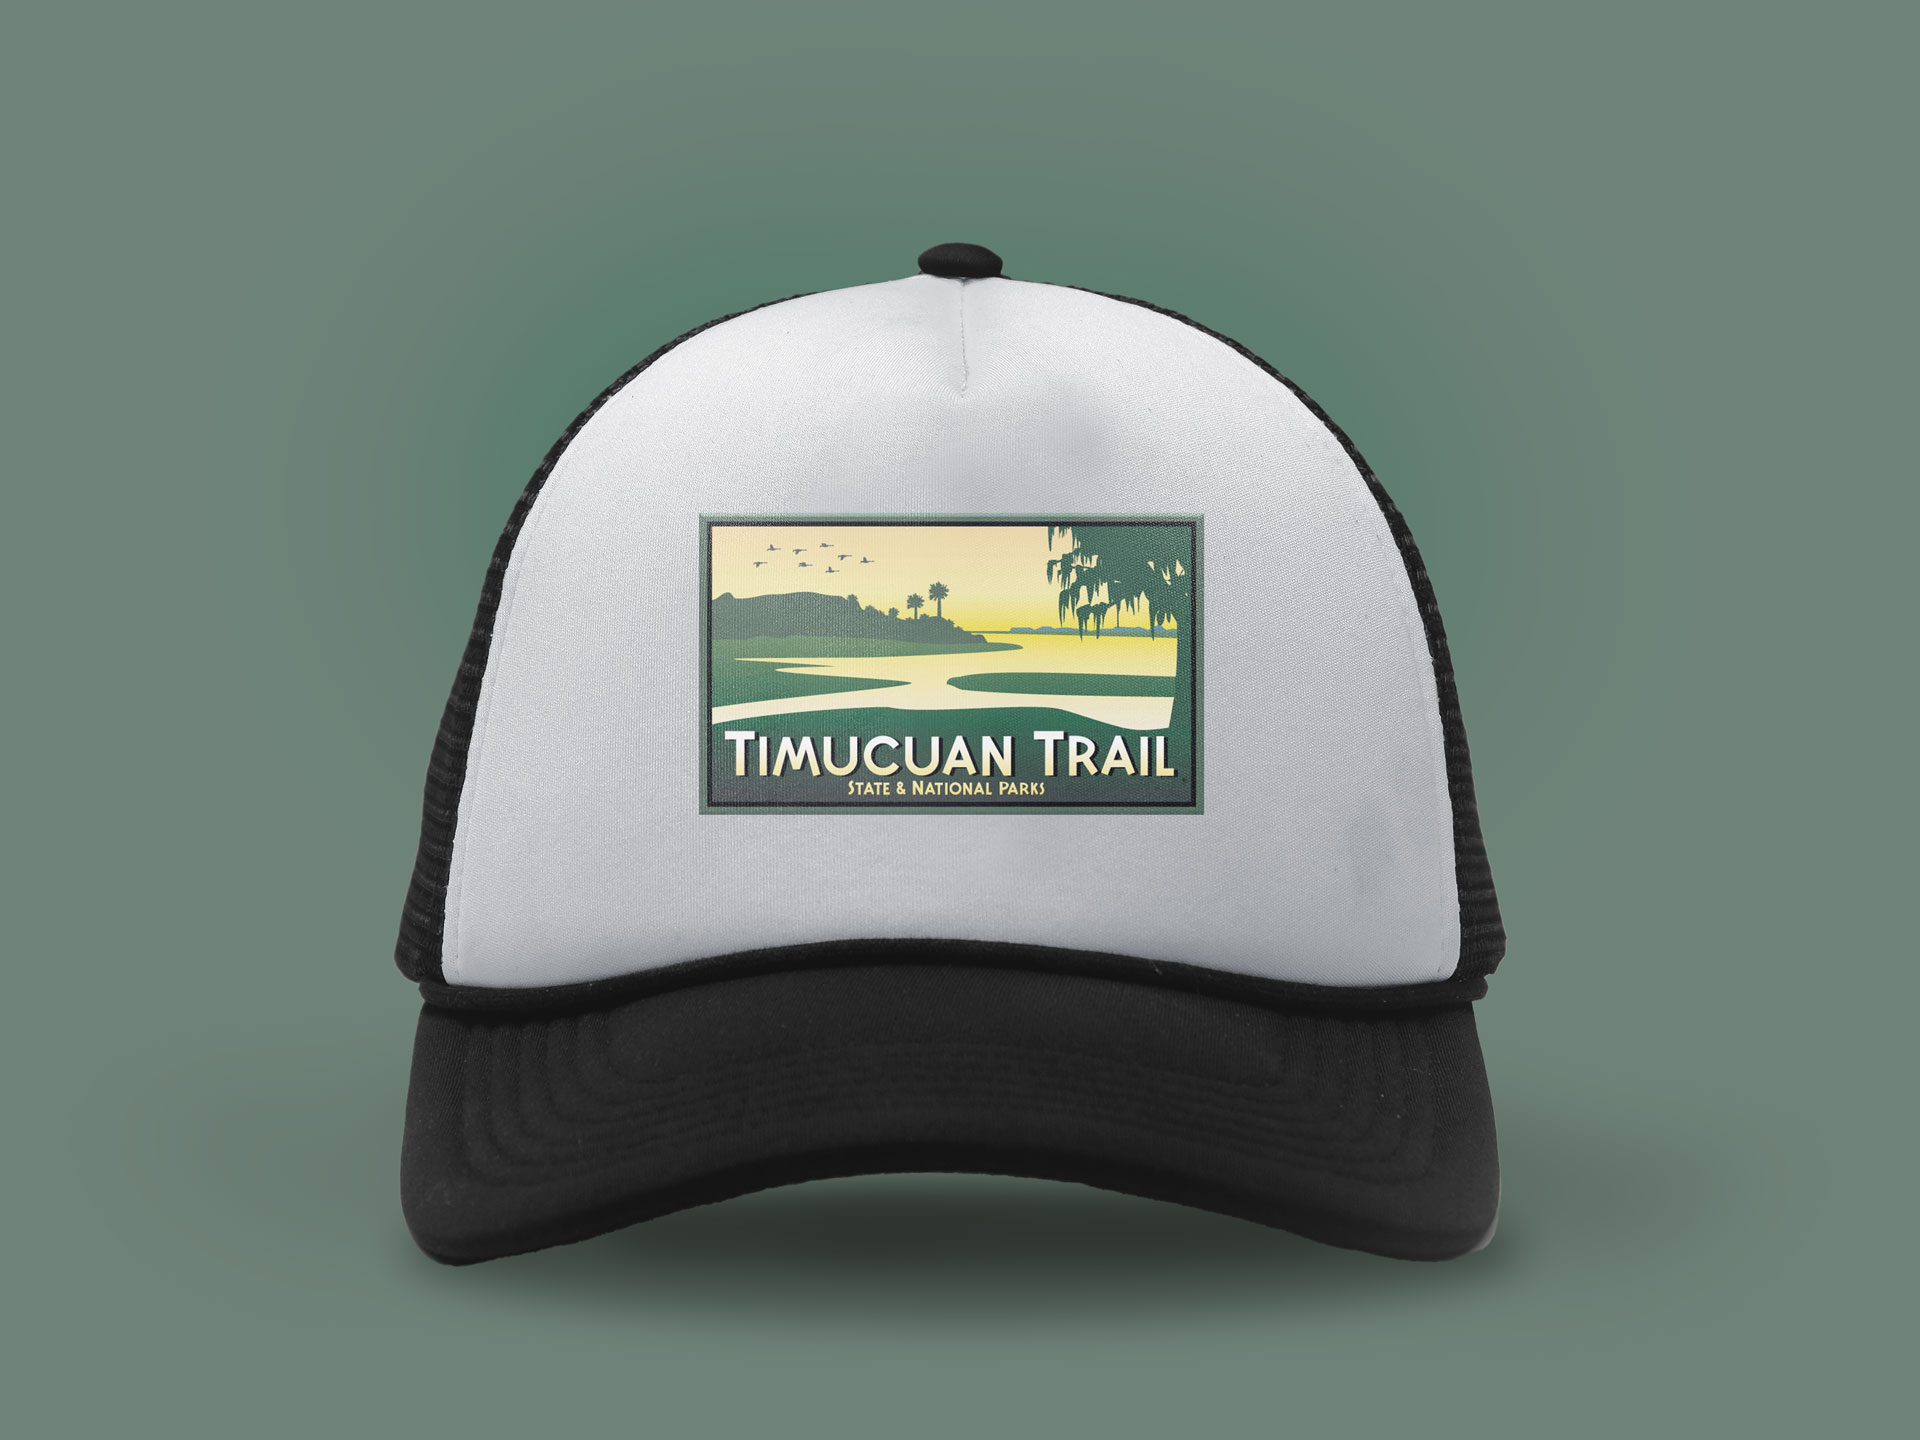 Quinn Harrington served as the Art Director for this project during their time at a previous agency. They collaborated with well-known California Illustrator Steve Forney to create the logo that now serves as the primary branding identity for the Timucuan Trail State and National Park System in Northeast Florida. The team worked alongside the National Park Service, Florida Department of Environmental Services, and City of Jacksonville Park officials to develop one of the largest park systems in the country.